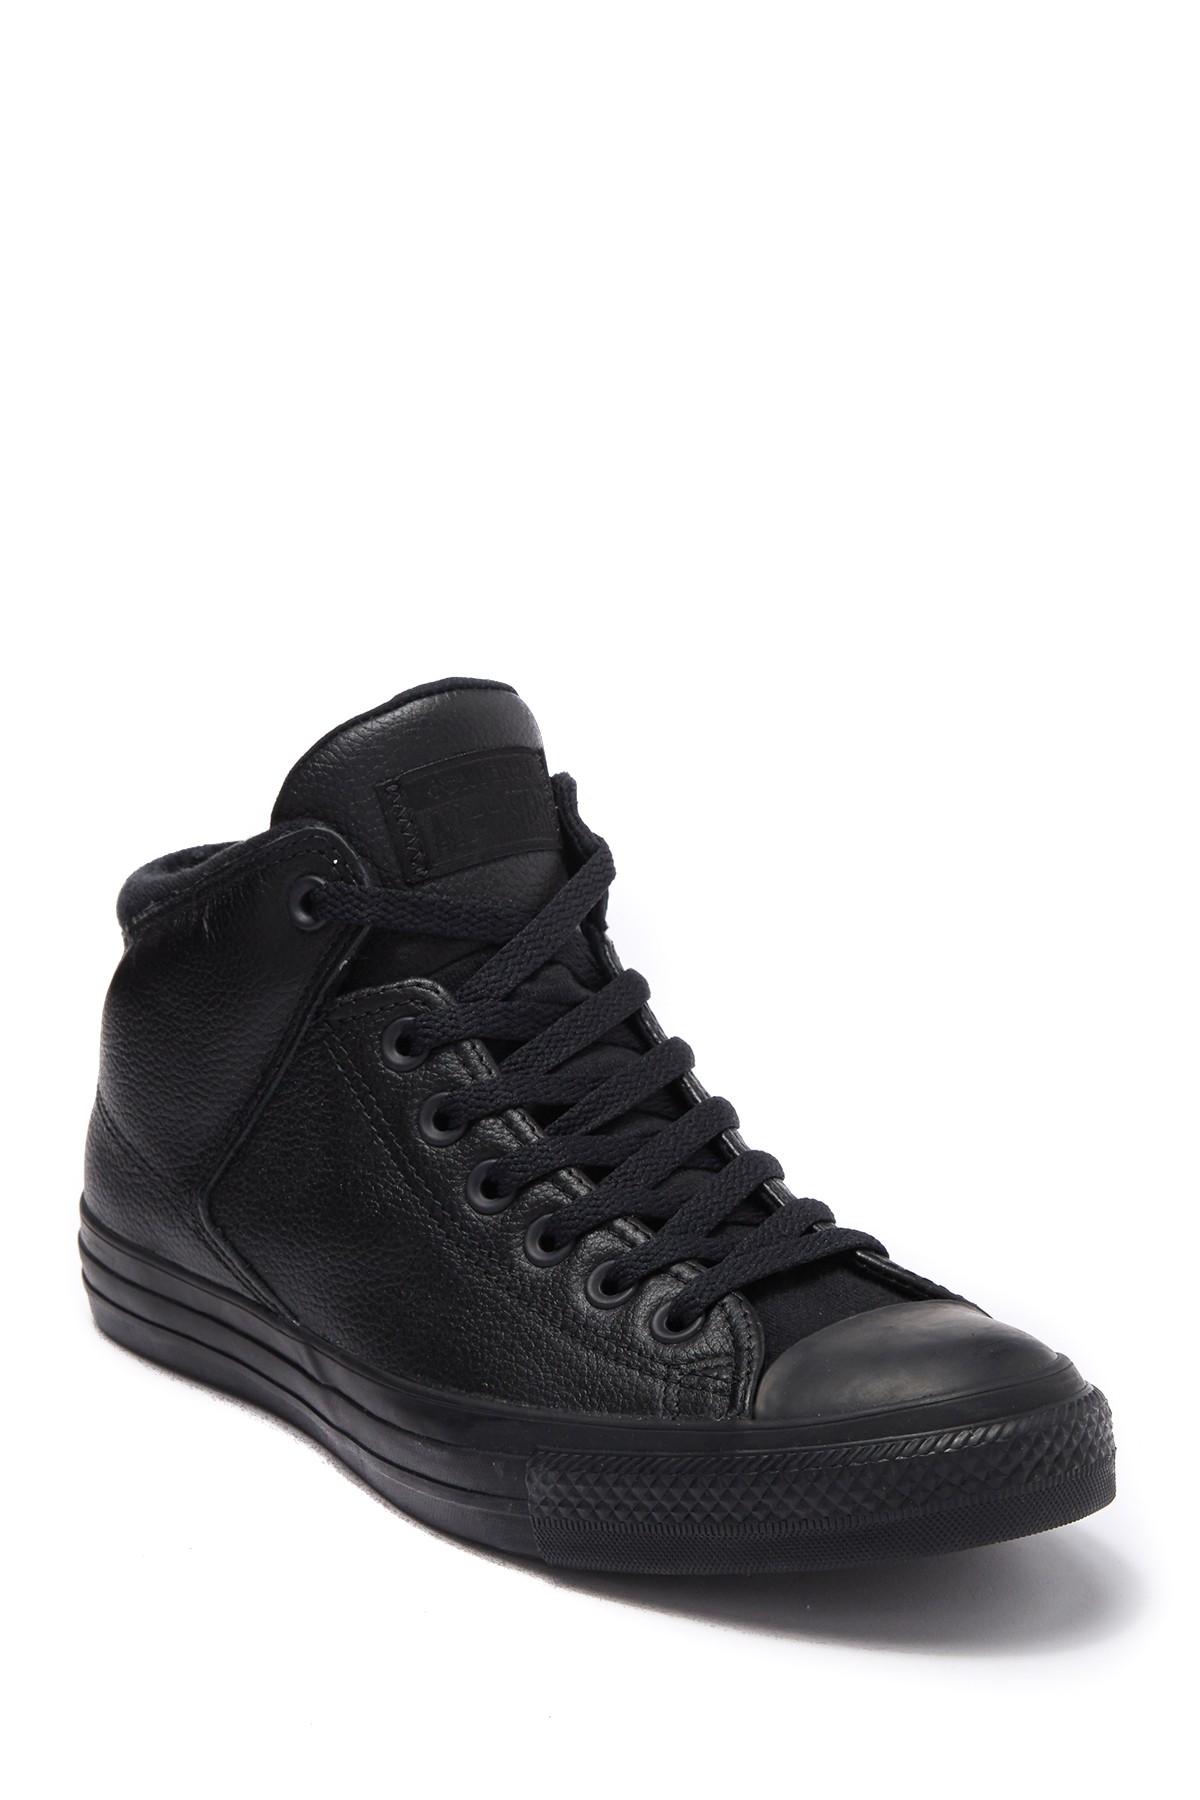 Converse Chuck Taylor All Star High Street Leather Sneaker (unisex) in ...